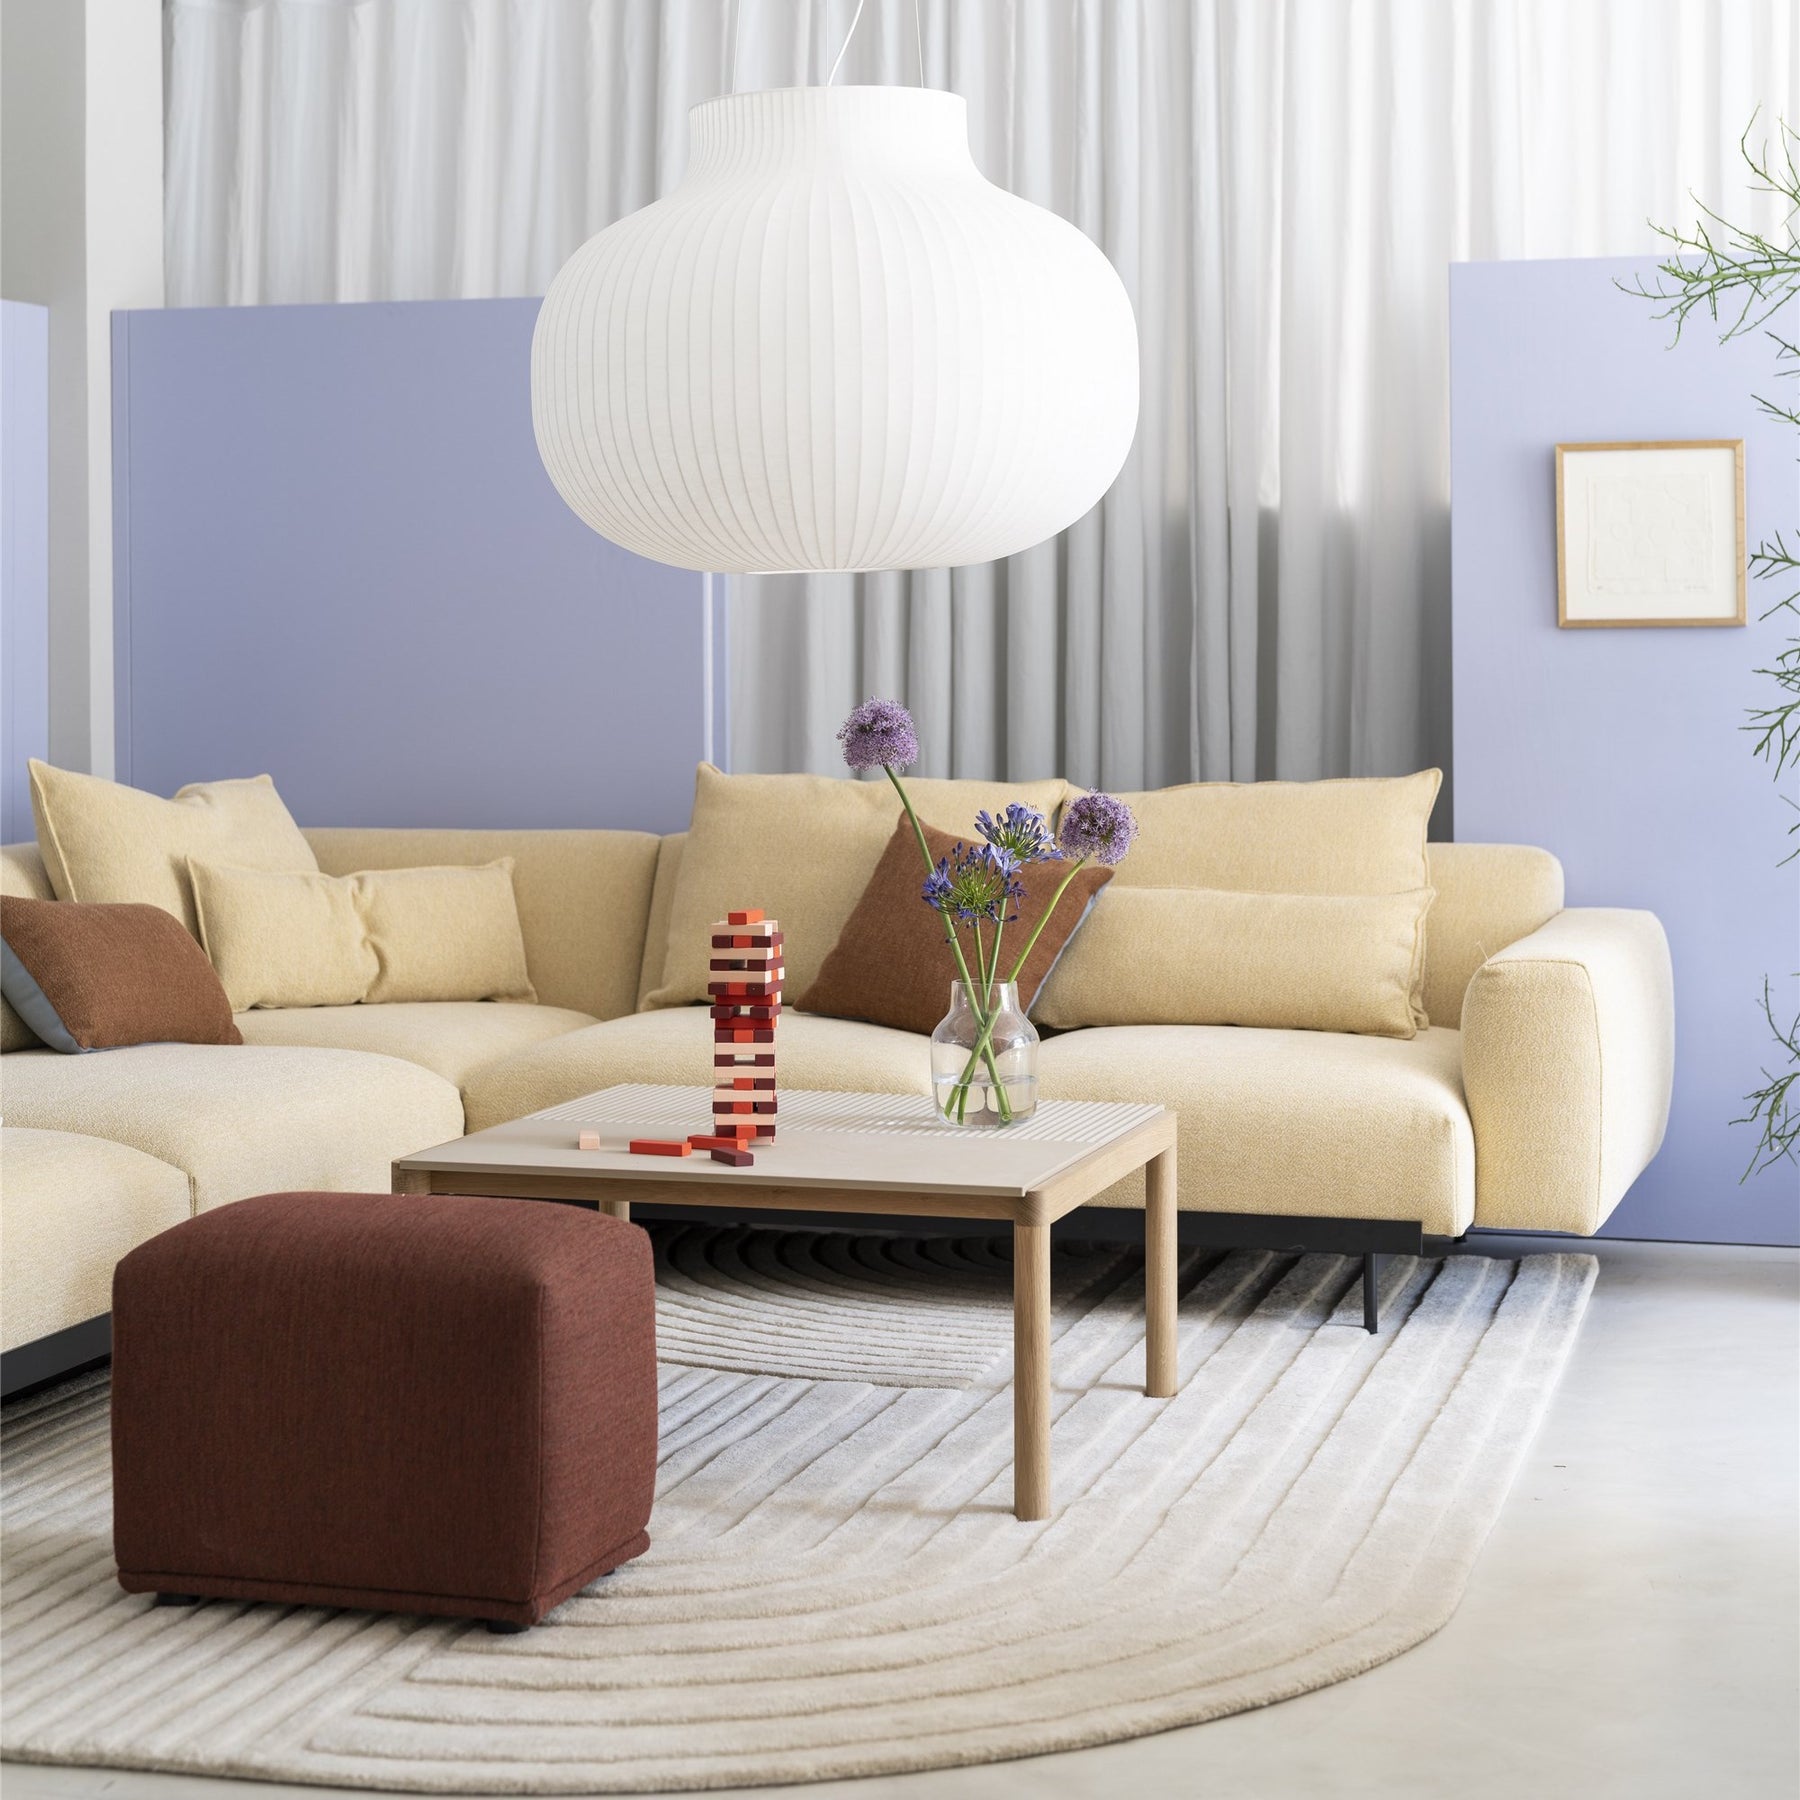 Muuto In Situ Modular Sofa in room with Strand Pendant and Revelo Rug